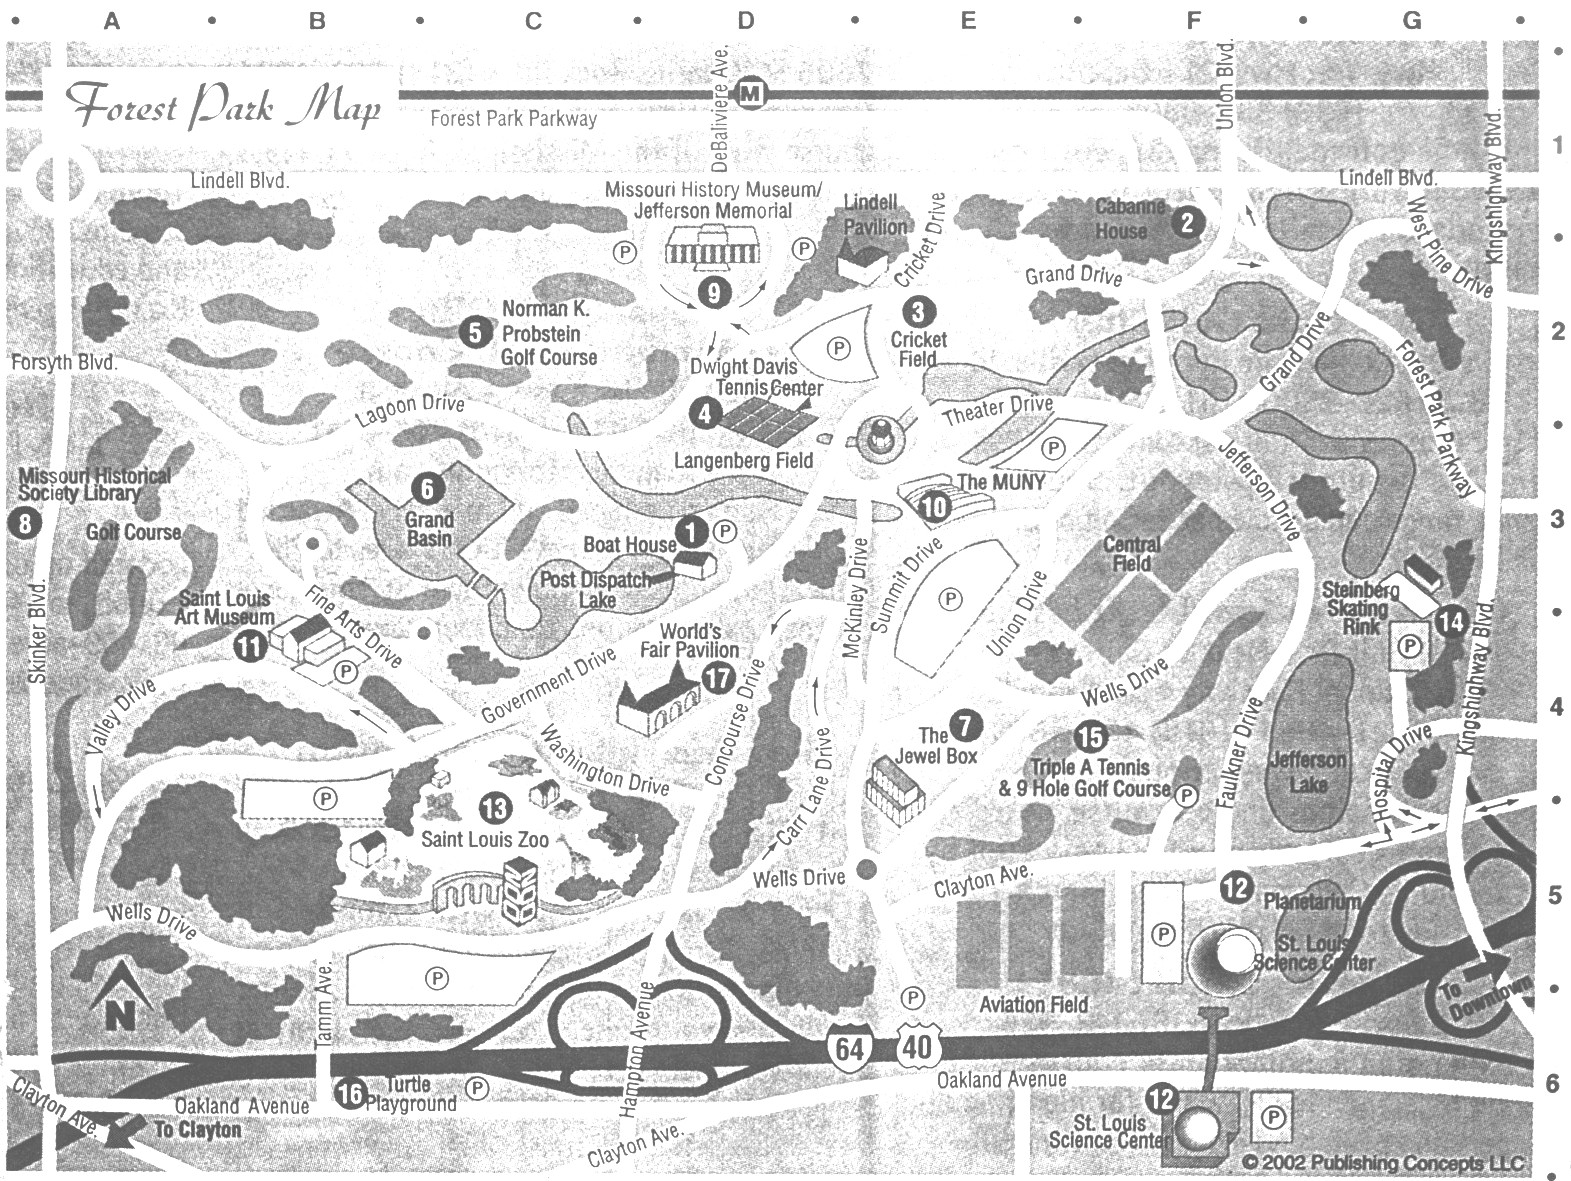 Dogtown -- Map of Forest Park in 2000